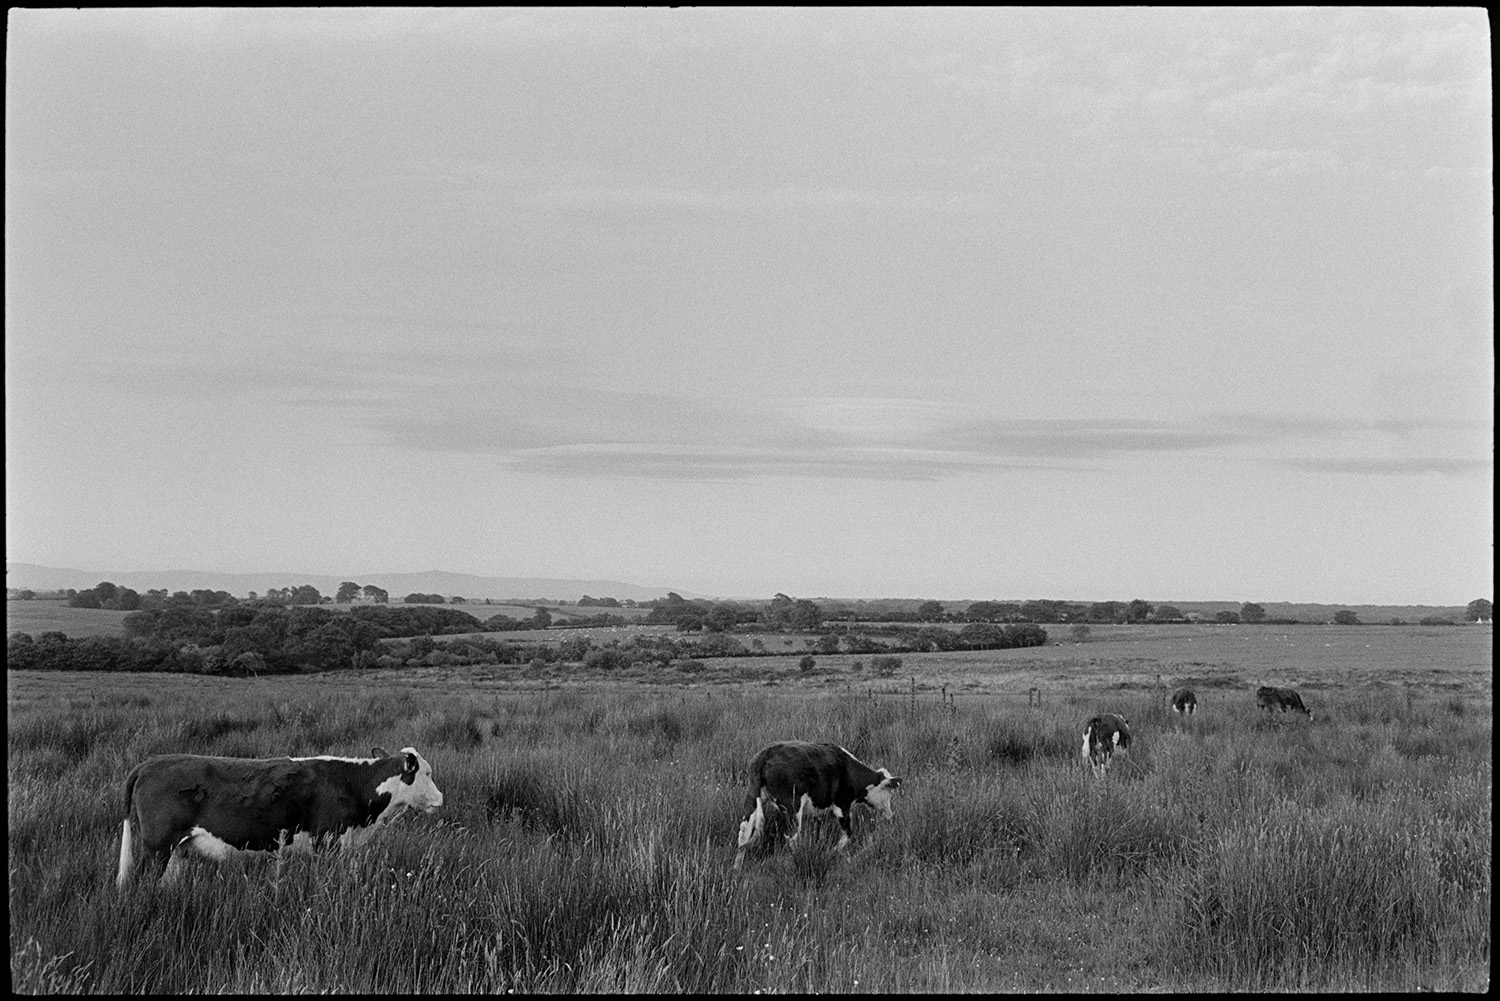 Cattle on moor.
[Cattle grazing in a field on Hollocombe Moor. Distant views of fields, hills and moorland can be seen in the background.]